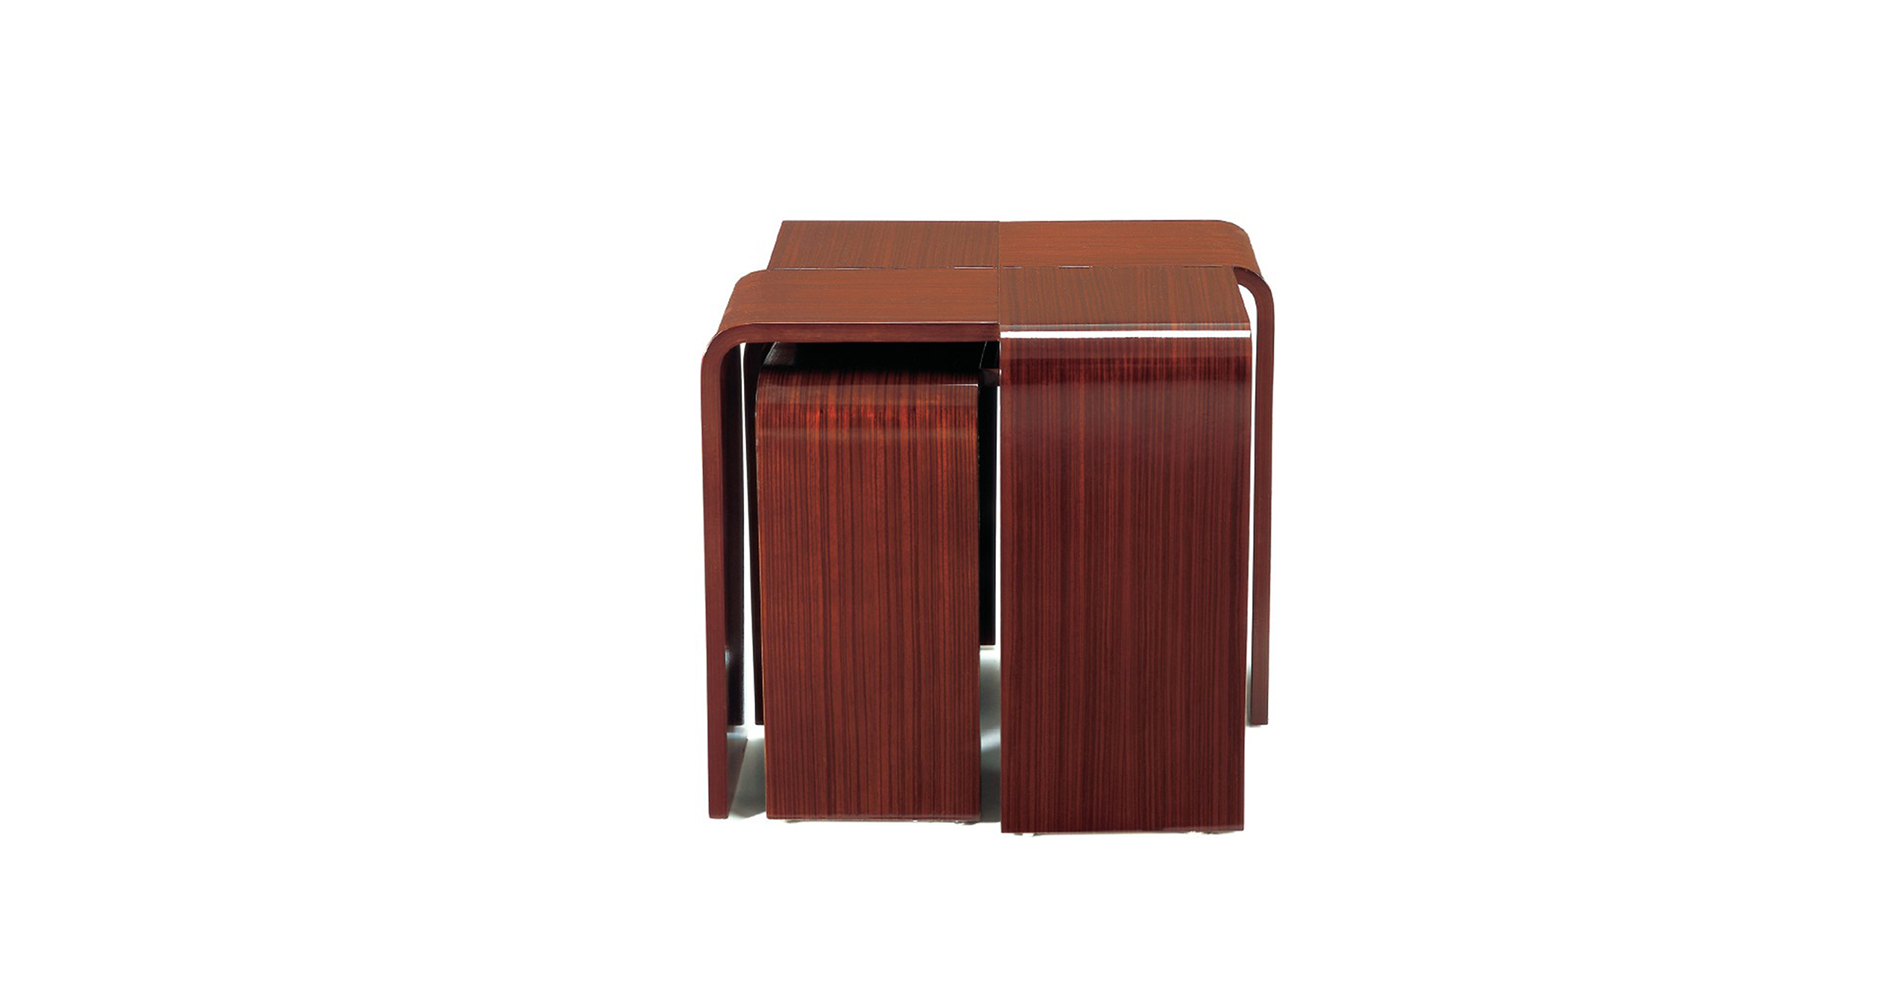 An image of Bandi Nesting Tables